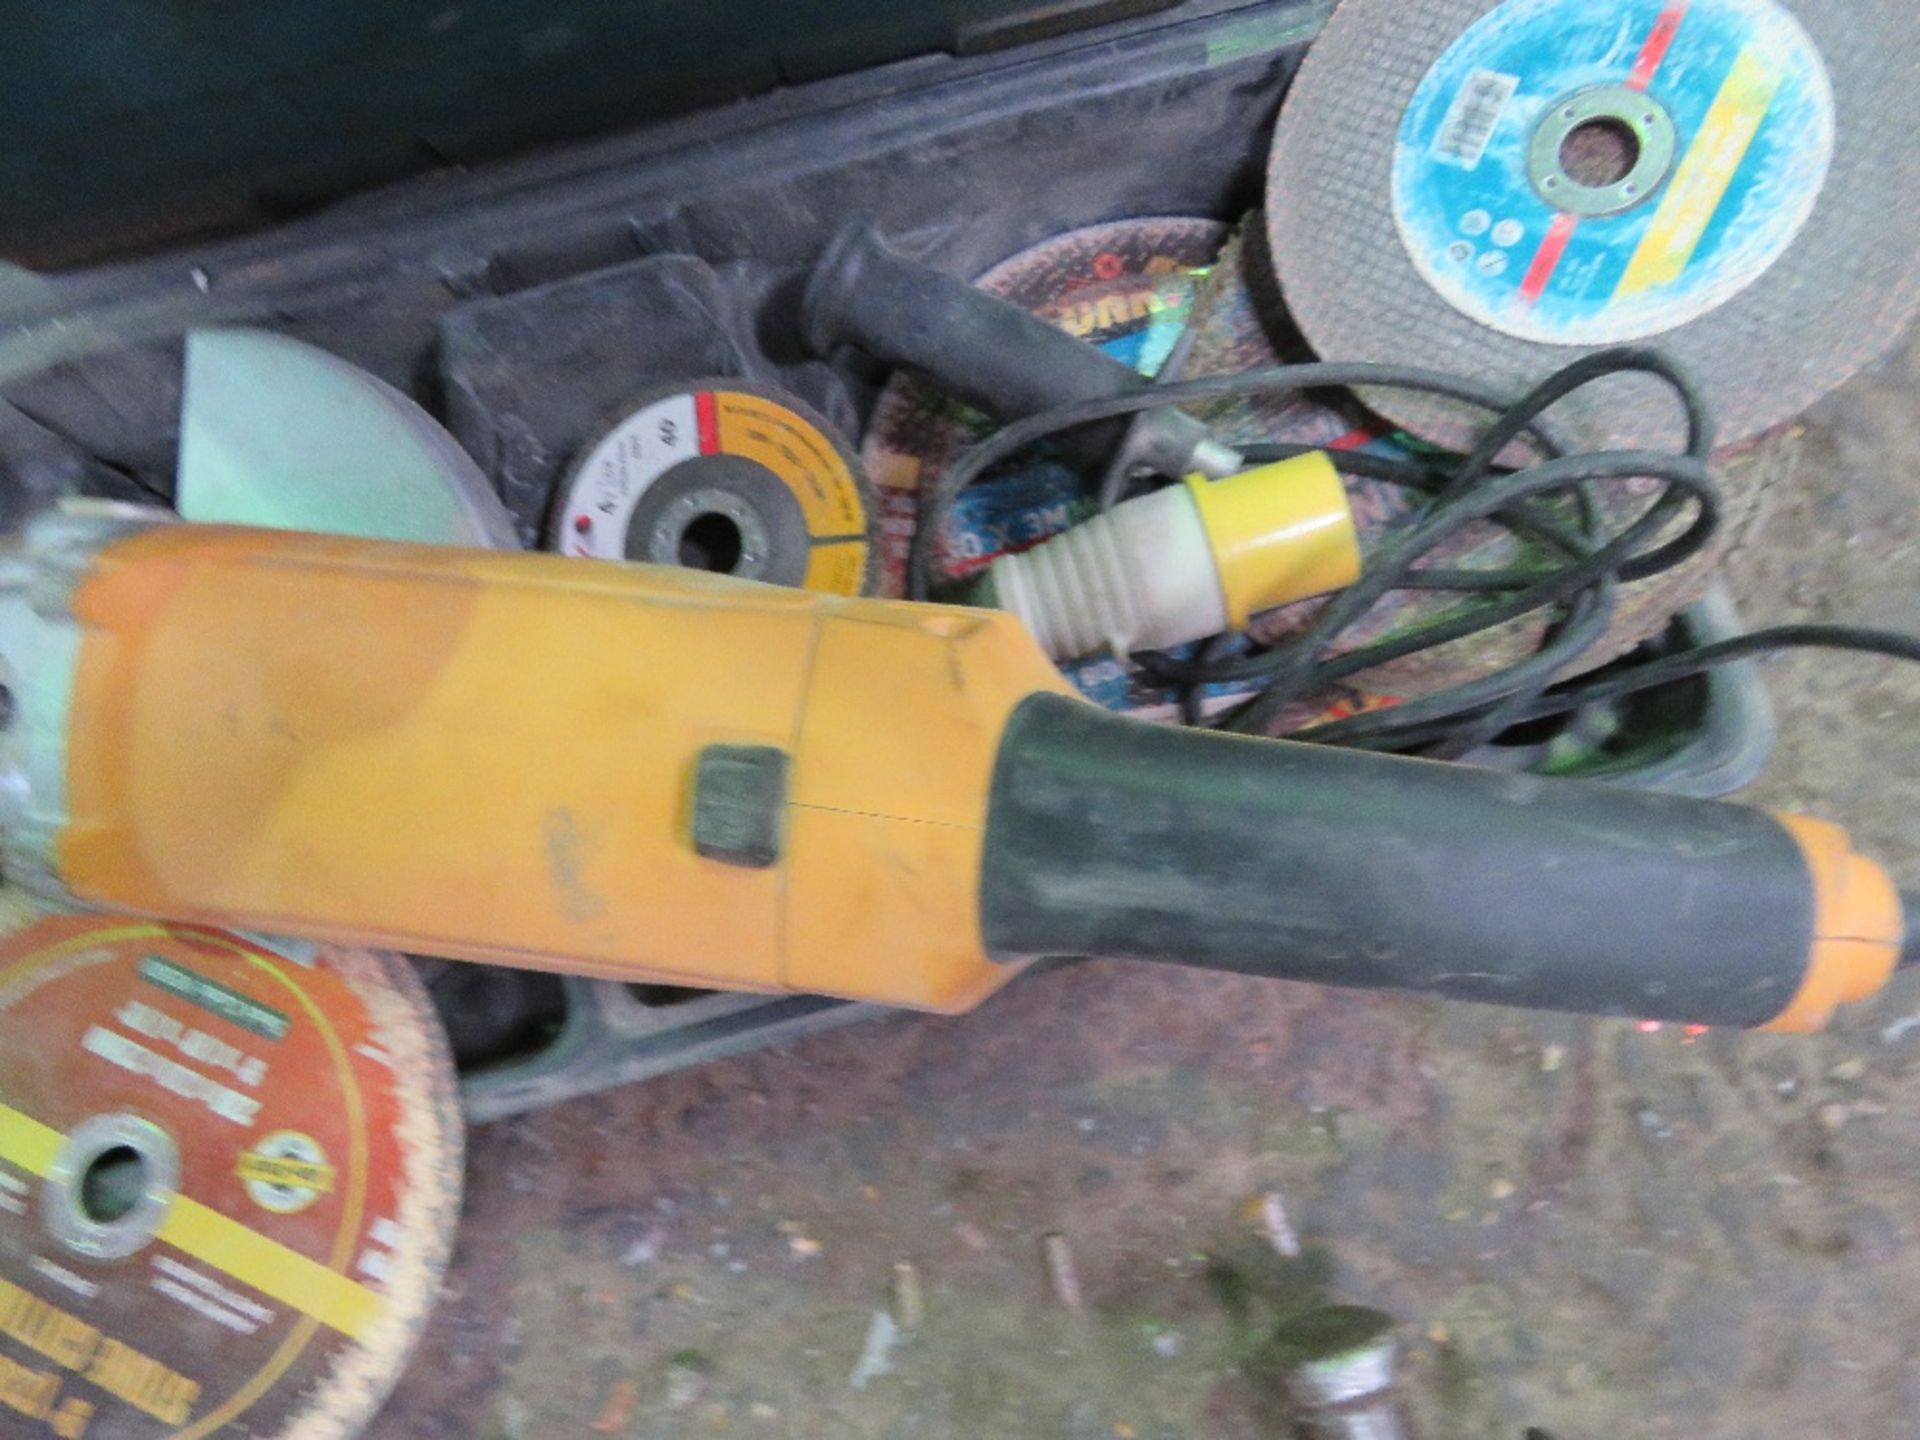 4 X POWER TOOLS: ANGLE GRINDER, DRILL, BATTERY DRILL, BATTERY CIRCULAR SAW. - Image 4 of 5